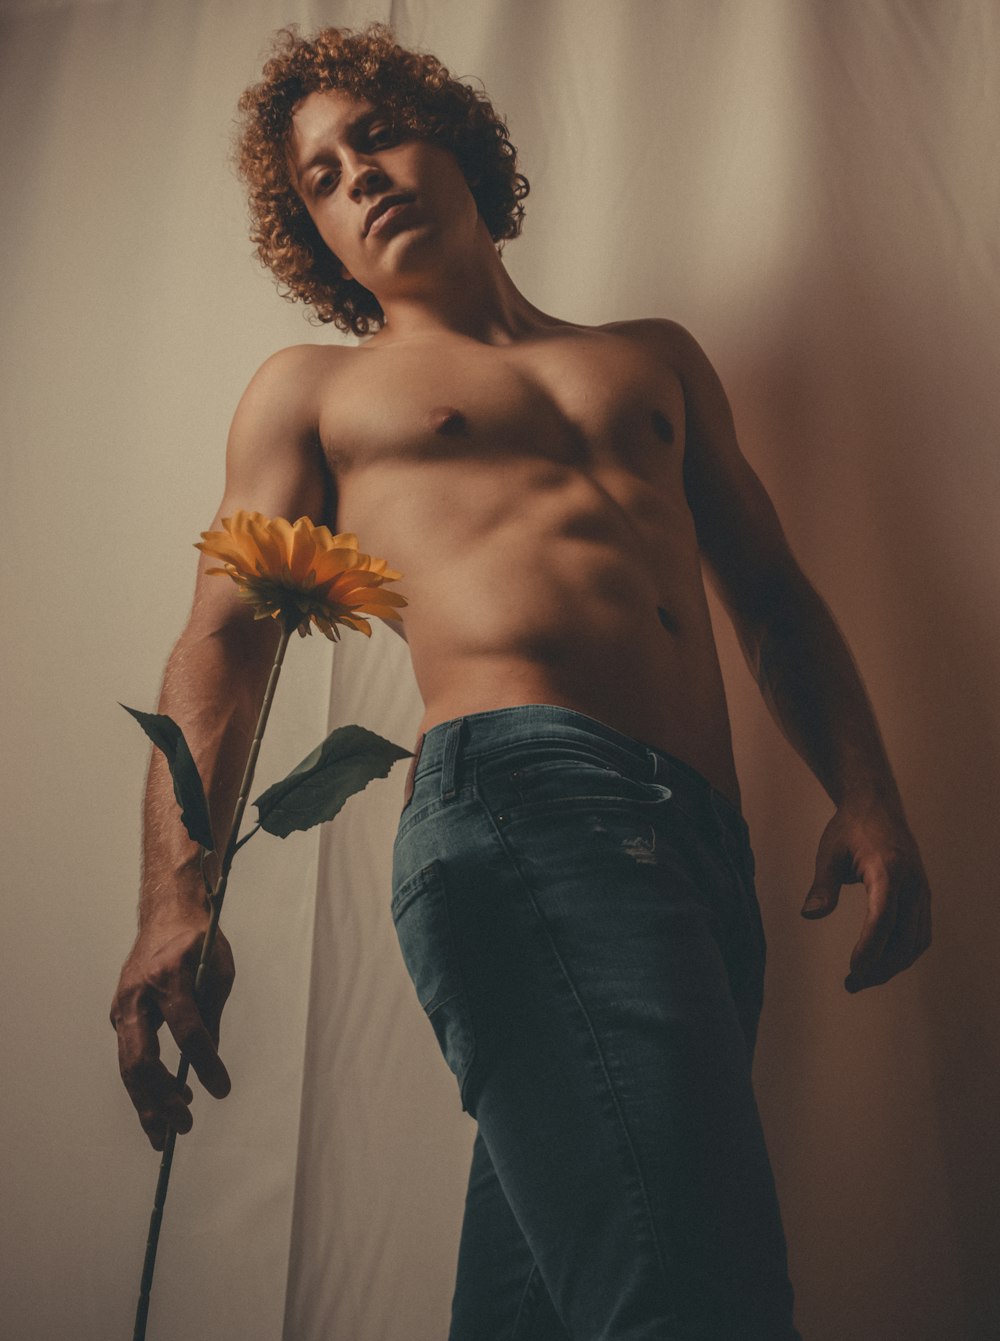 a shirtless man holding a flower in front of a curtain